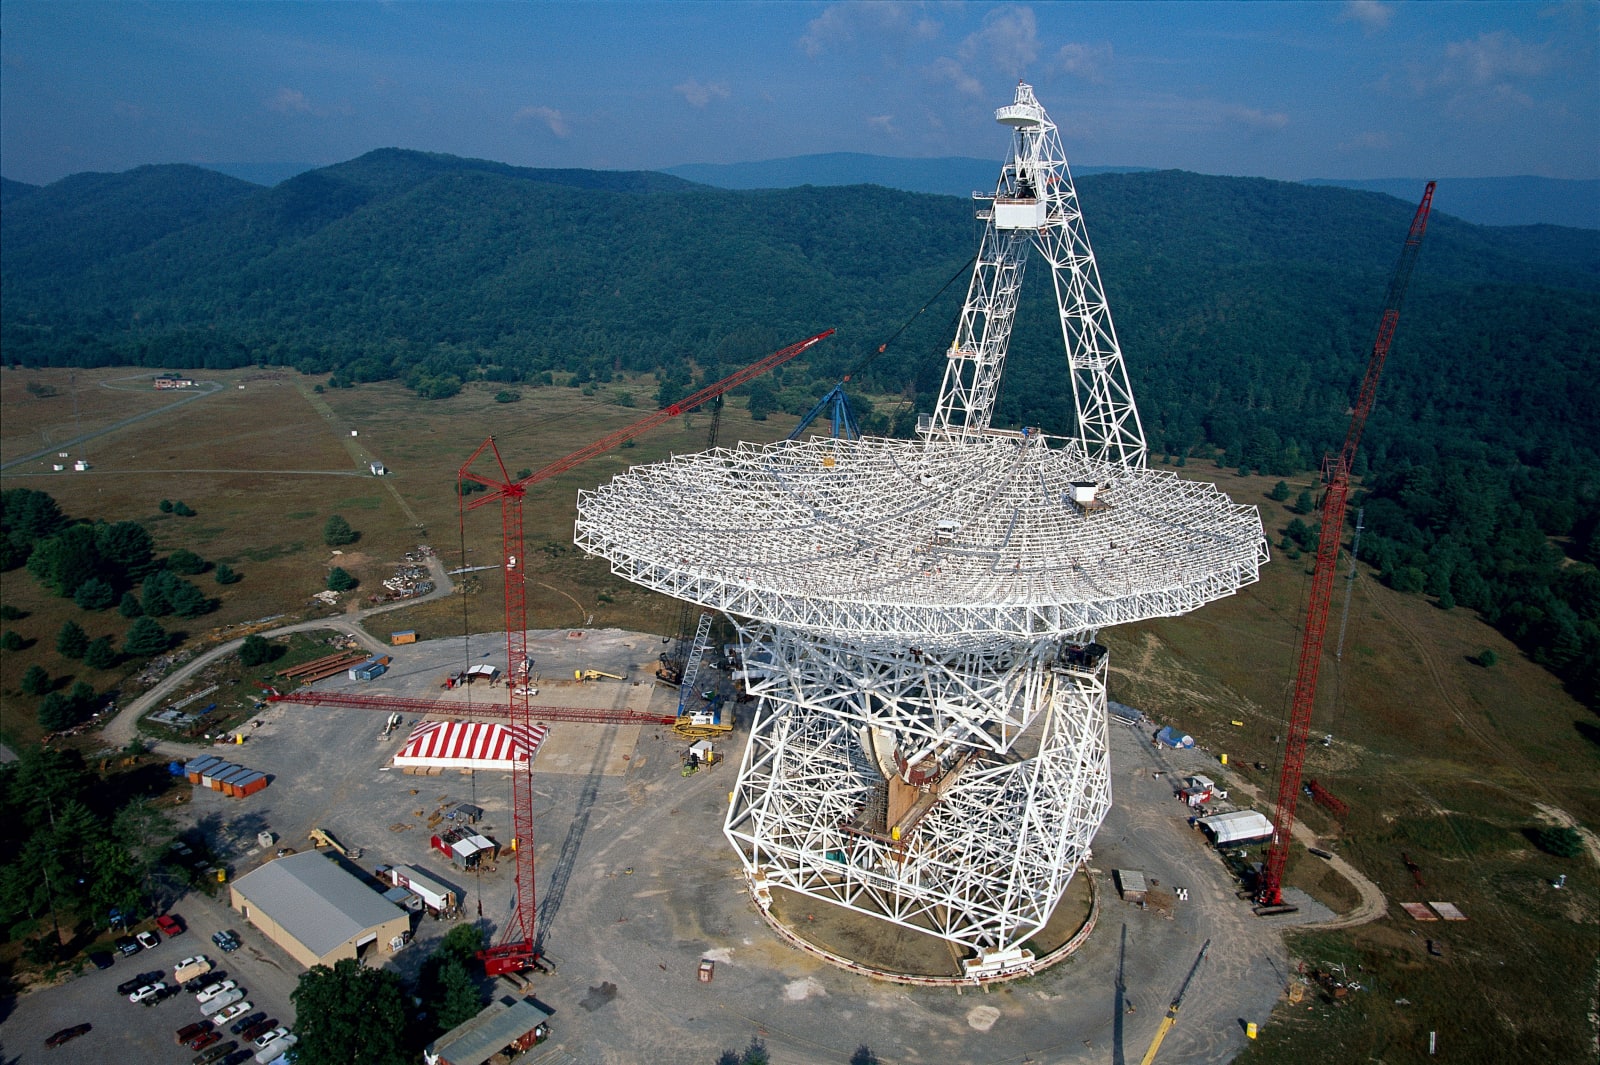 The Robert C. Byrd Green Bank Telescope is the world's largest fully steerable radio telescope.